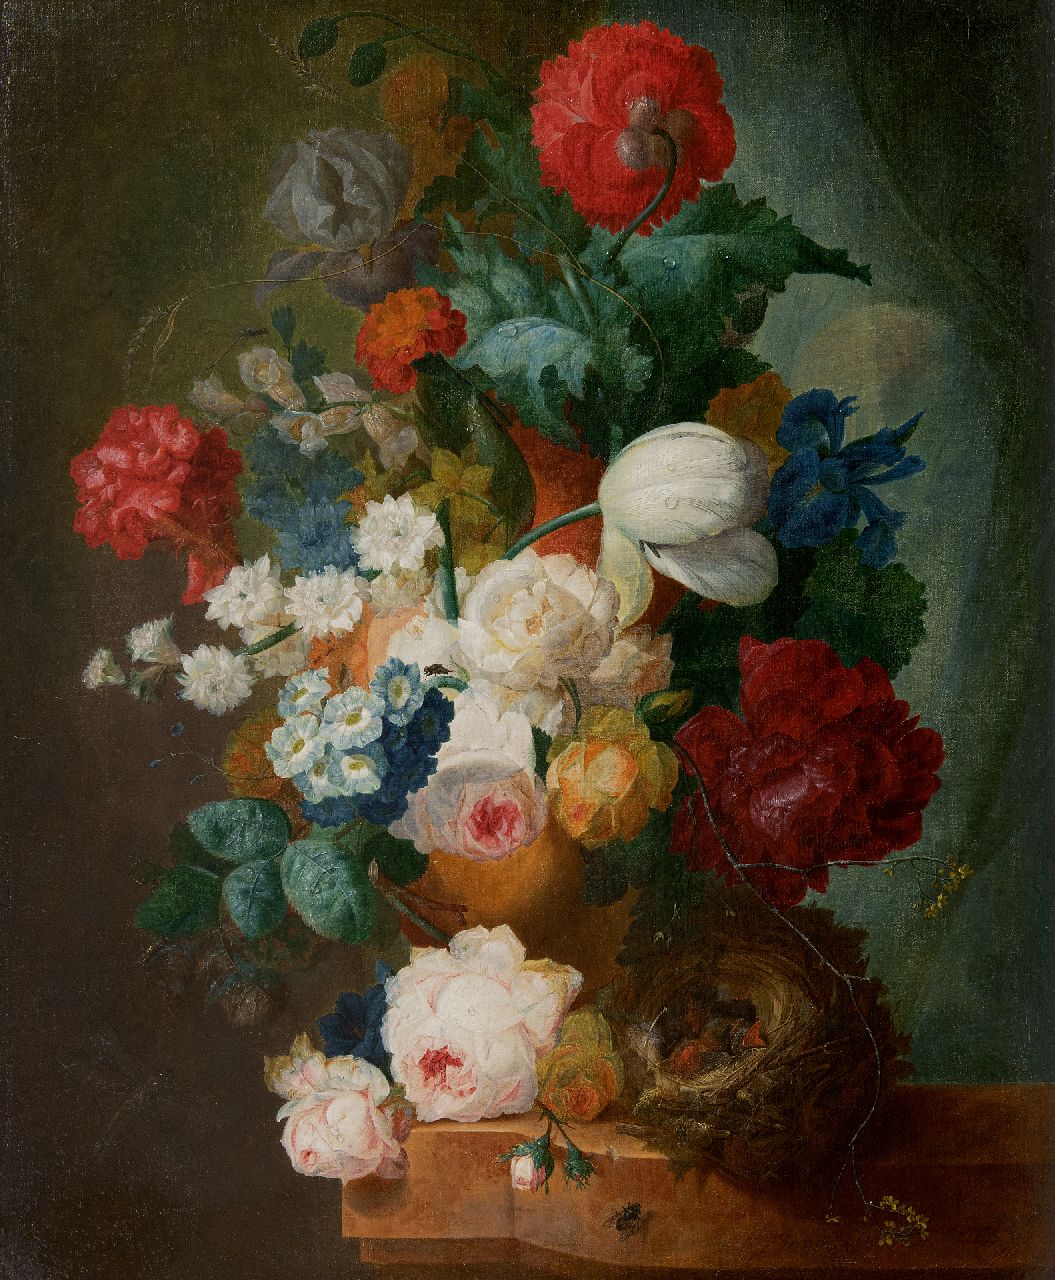 Os J. van | Jan van Os | Paintings offered for sale | Still life with roses, poppies and bird's nest, oil on canvas 66.3 x 55.0 cm, signed l.l. (bears feaded  signature) and circa 1765